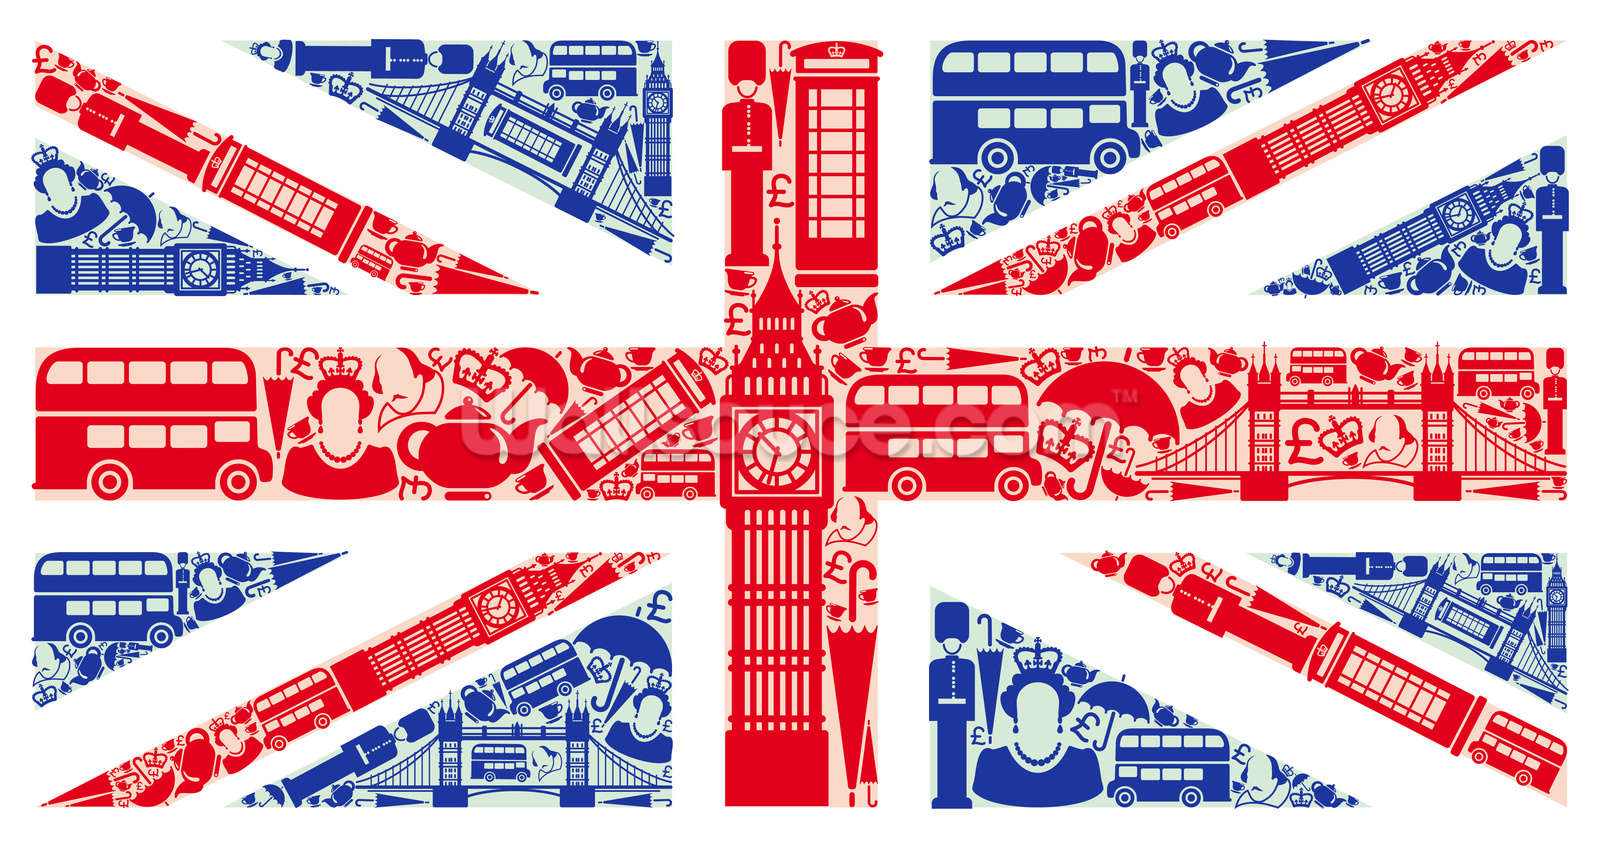 Union Jack Montage Wall Mural